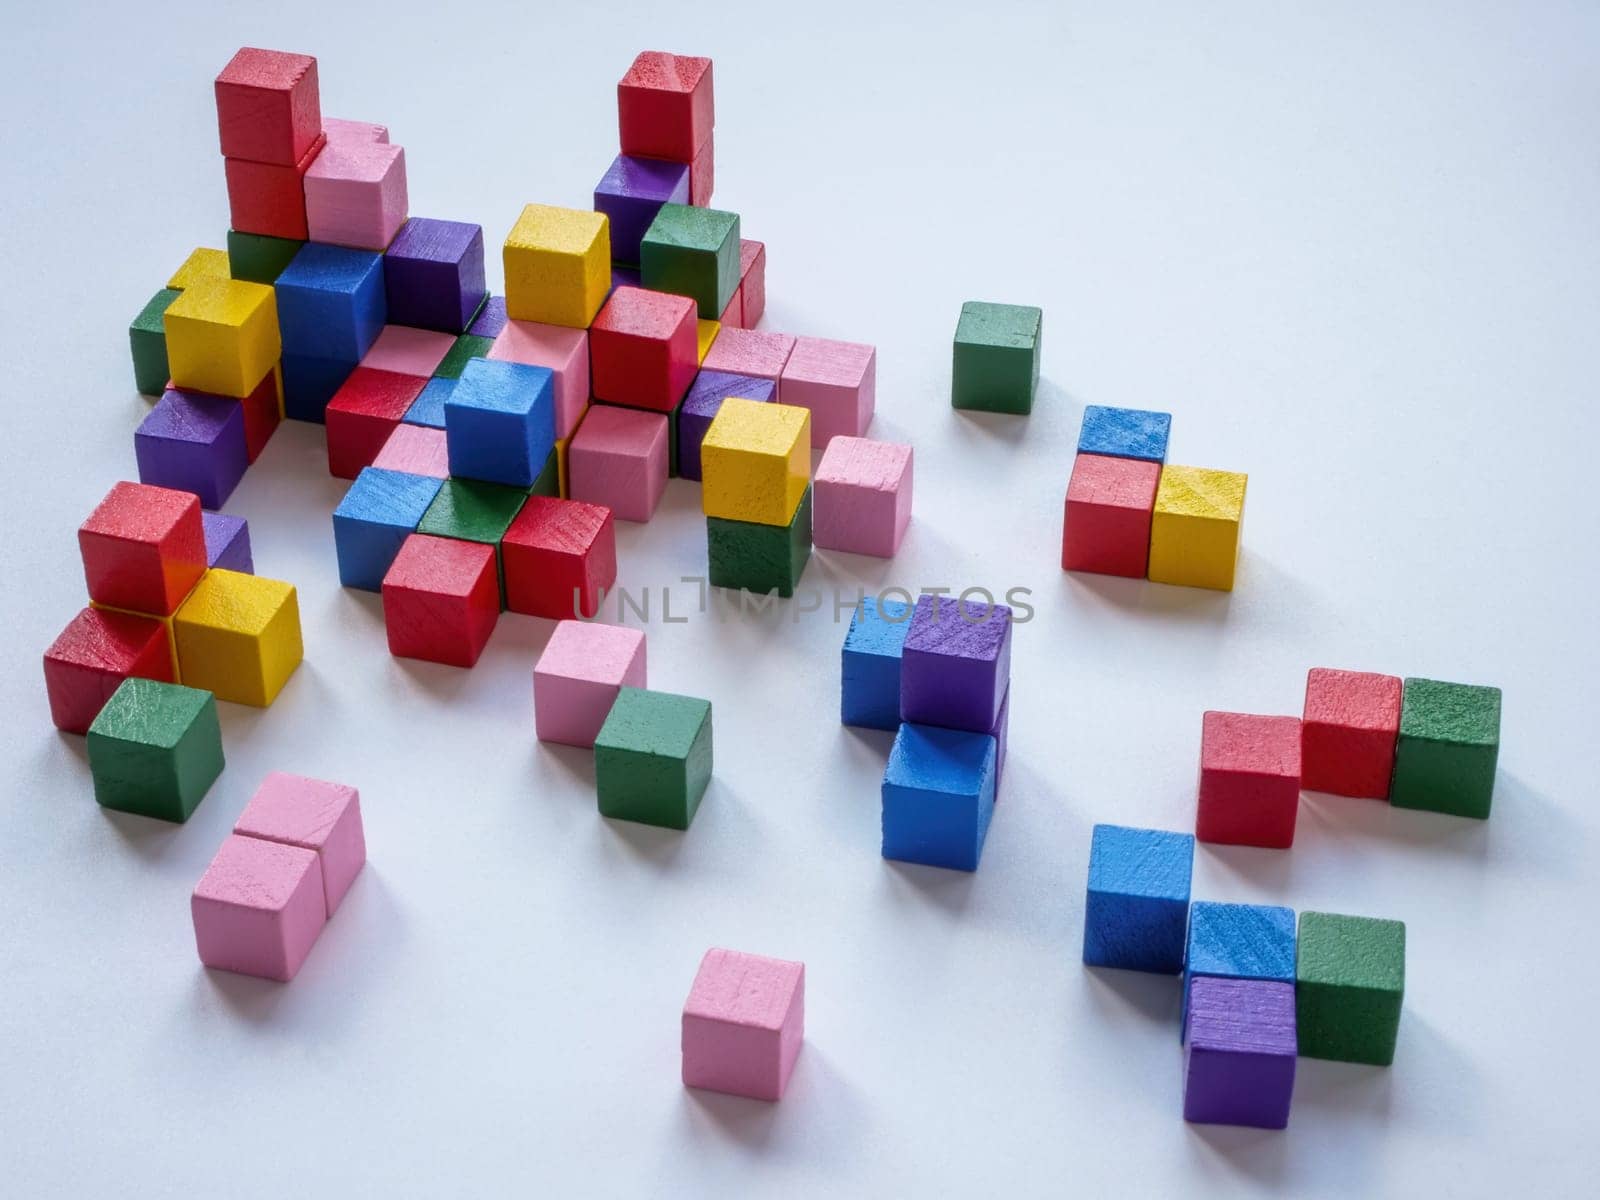 Abstract structure of colored cubes as symbol of complex interaction.